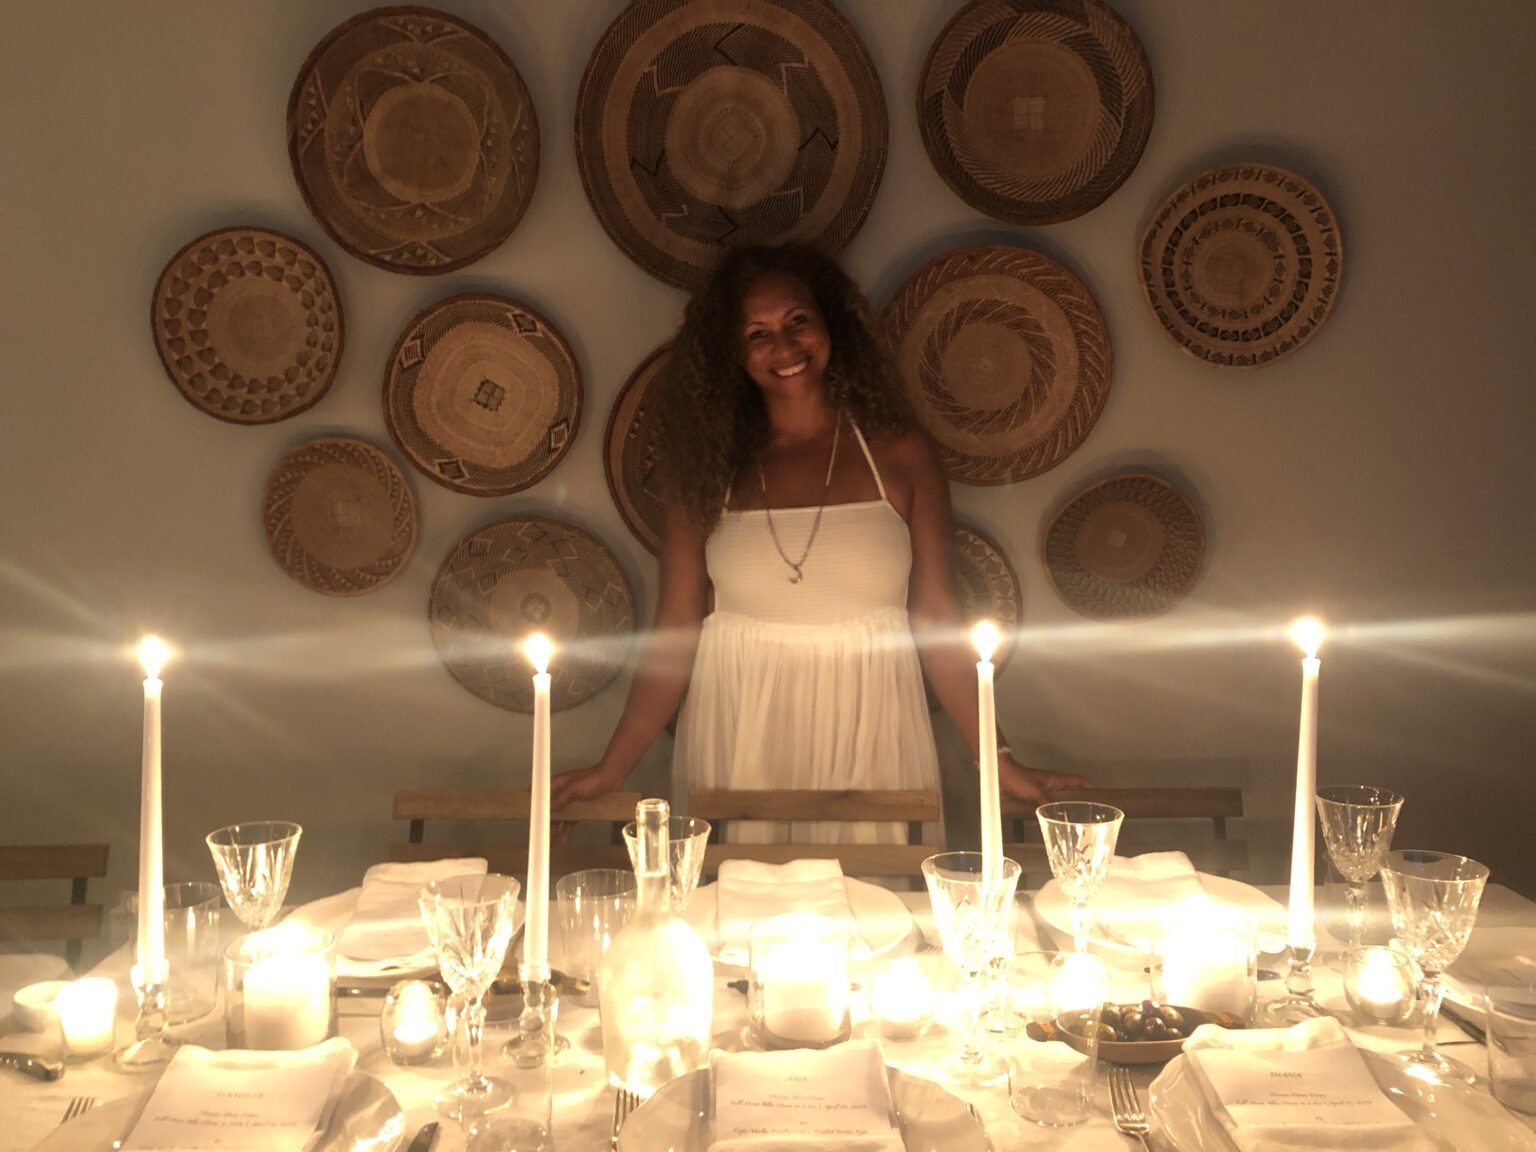 a woman standing in front of a table with plates on it.